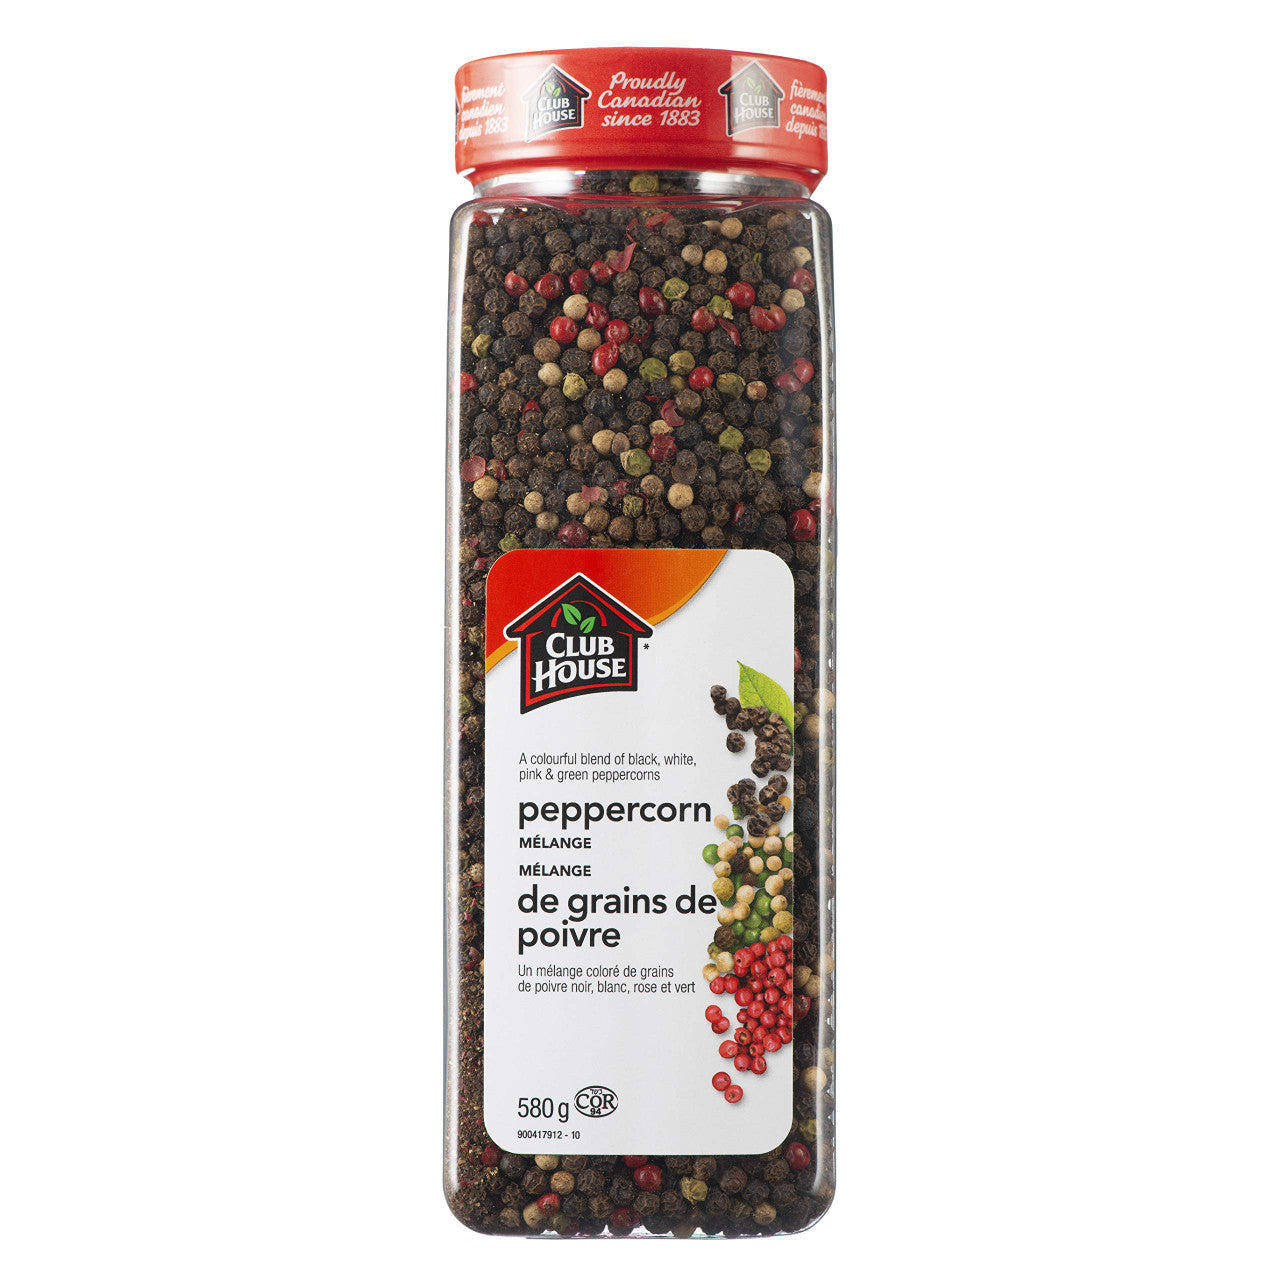 Club House Peppercorn Melange, 580g/20.5oz {Imported from Canada}